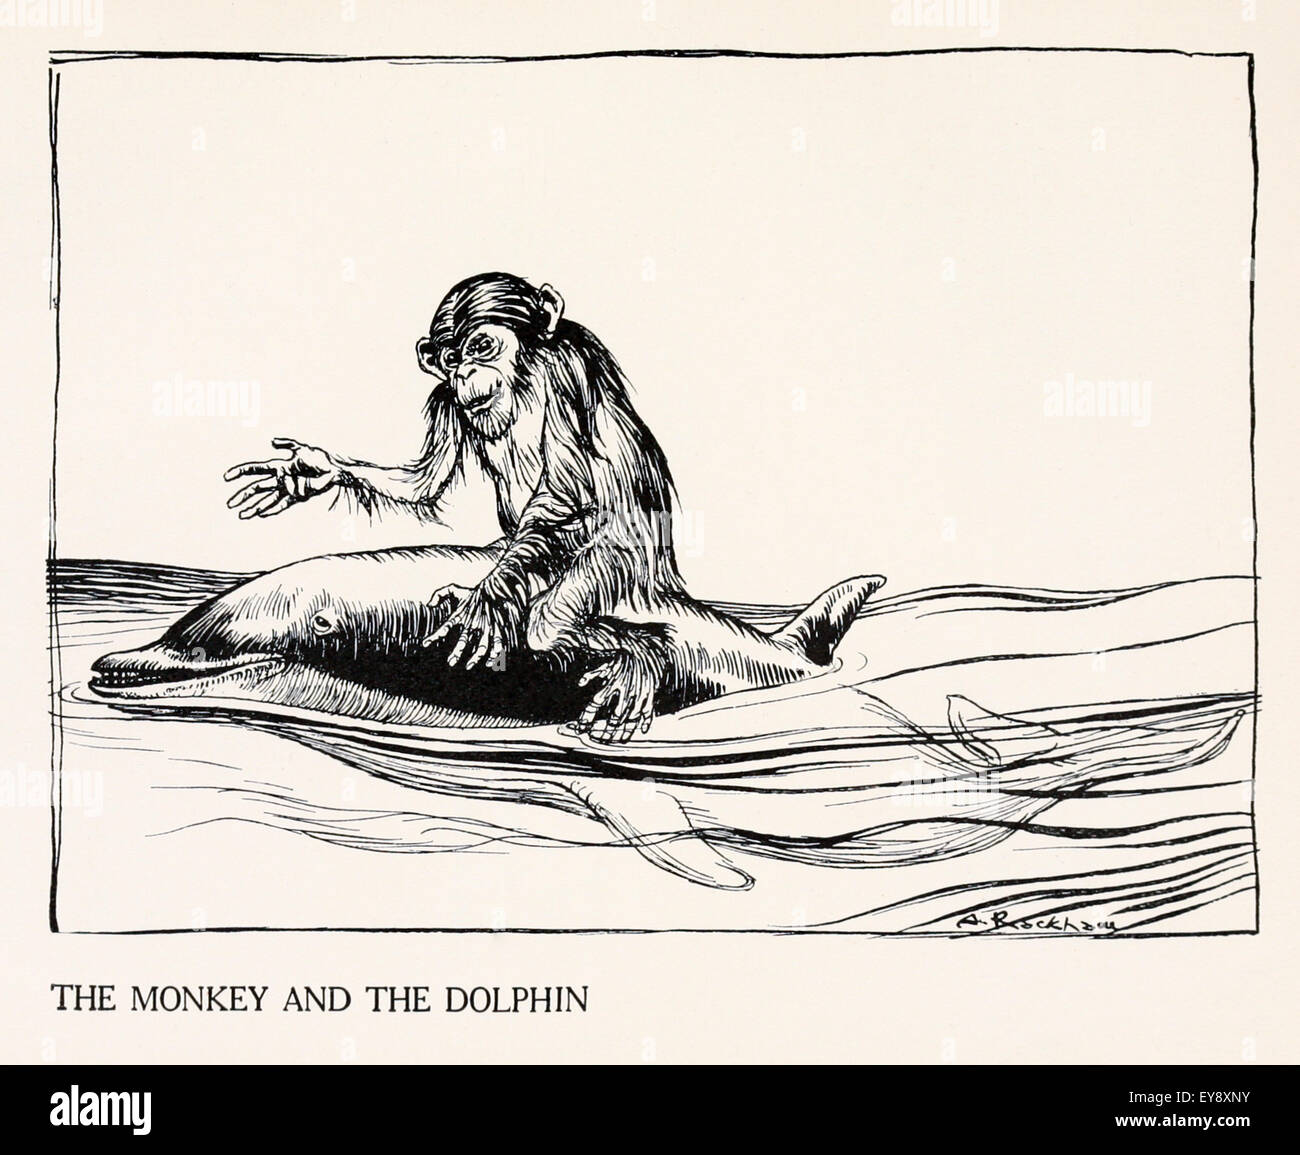 'The Monkey and the Dolphin' fable by Aesop (circa 600BC). Dolphin saves drowning monkey and takes him home to Athens, on the way it becomes clear the monkey is lying so the dolphin swims off.  Bragging, lying, and pretending, has cost many a man his life and estate. Illustration by Arthur Rackham (1867-1939). See description for more information. Stock Photo